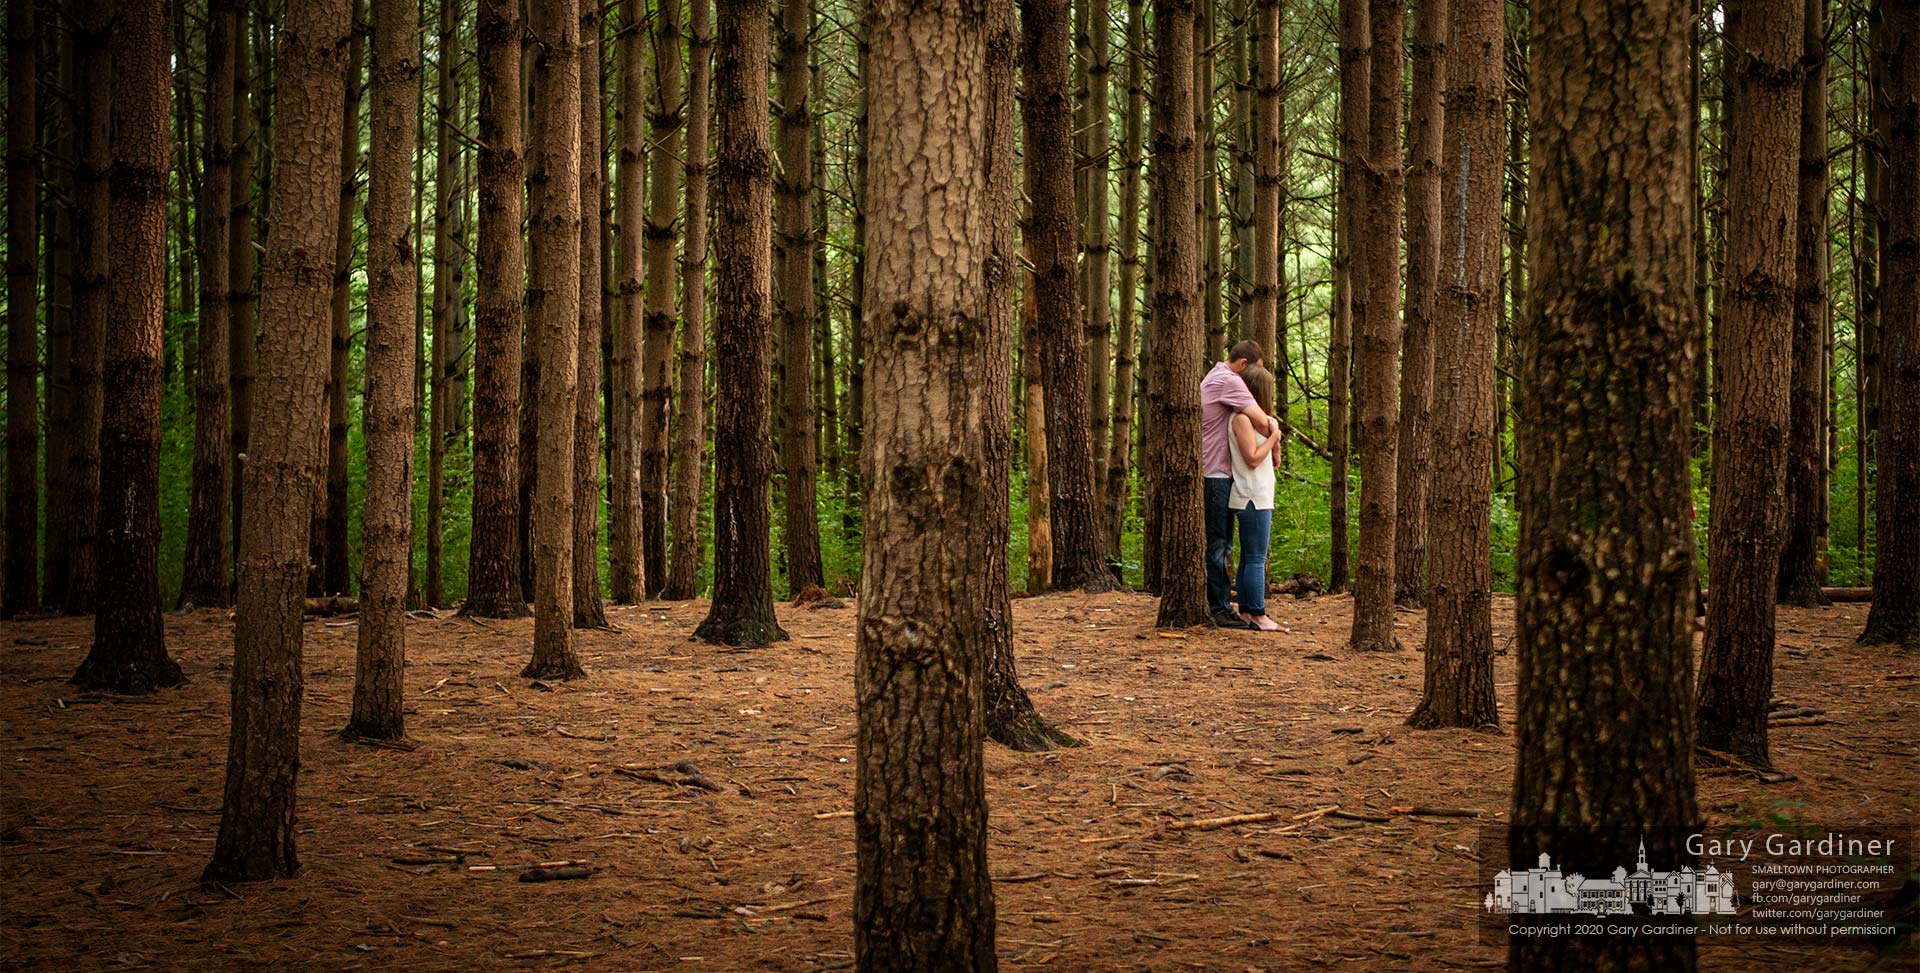 A couple embraces as they pose for photographs in a small stand of pine trees at Hoover Reservoir. My Final Photo for Sept. 13, 2020.